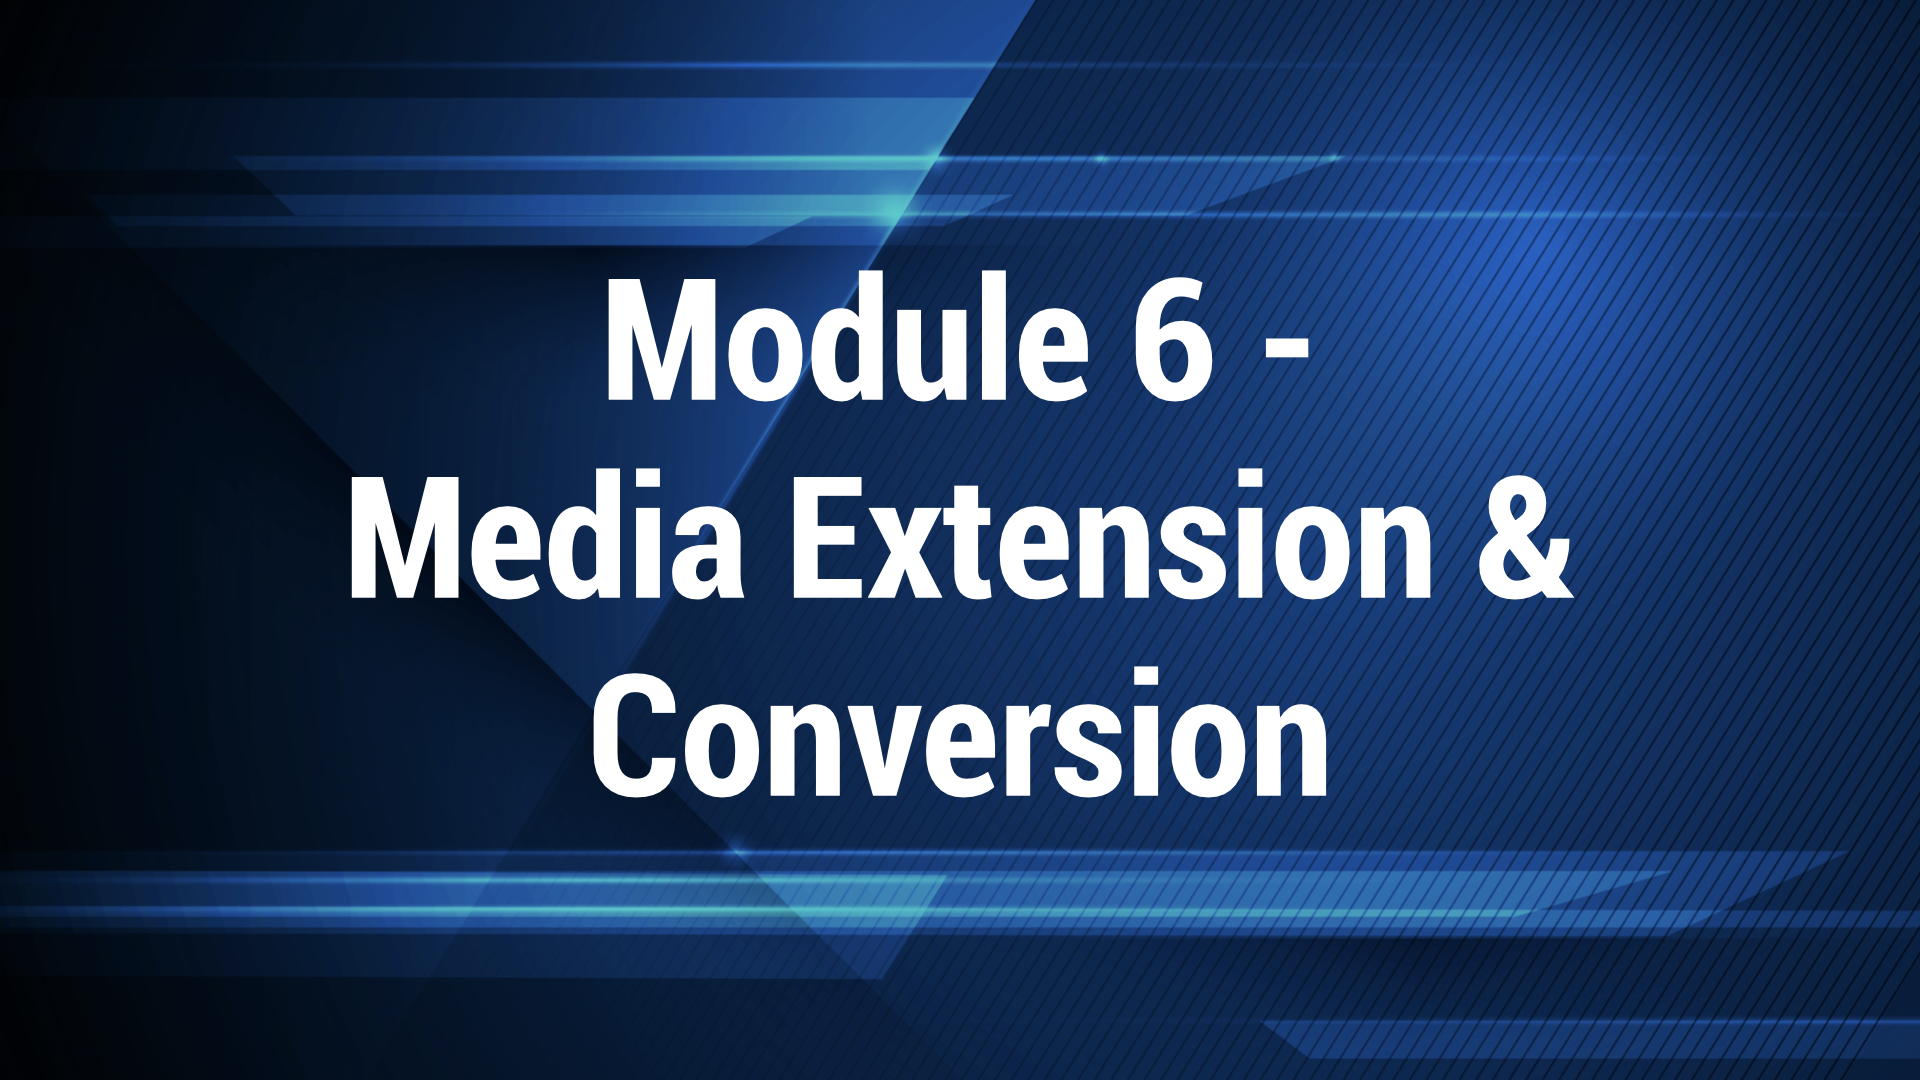 Module 6 - Media Extension and Conversion